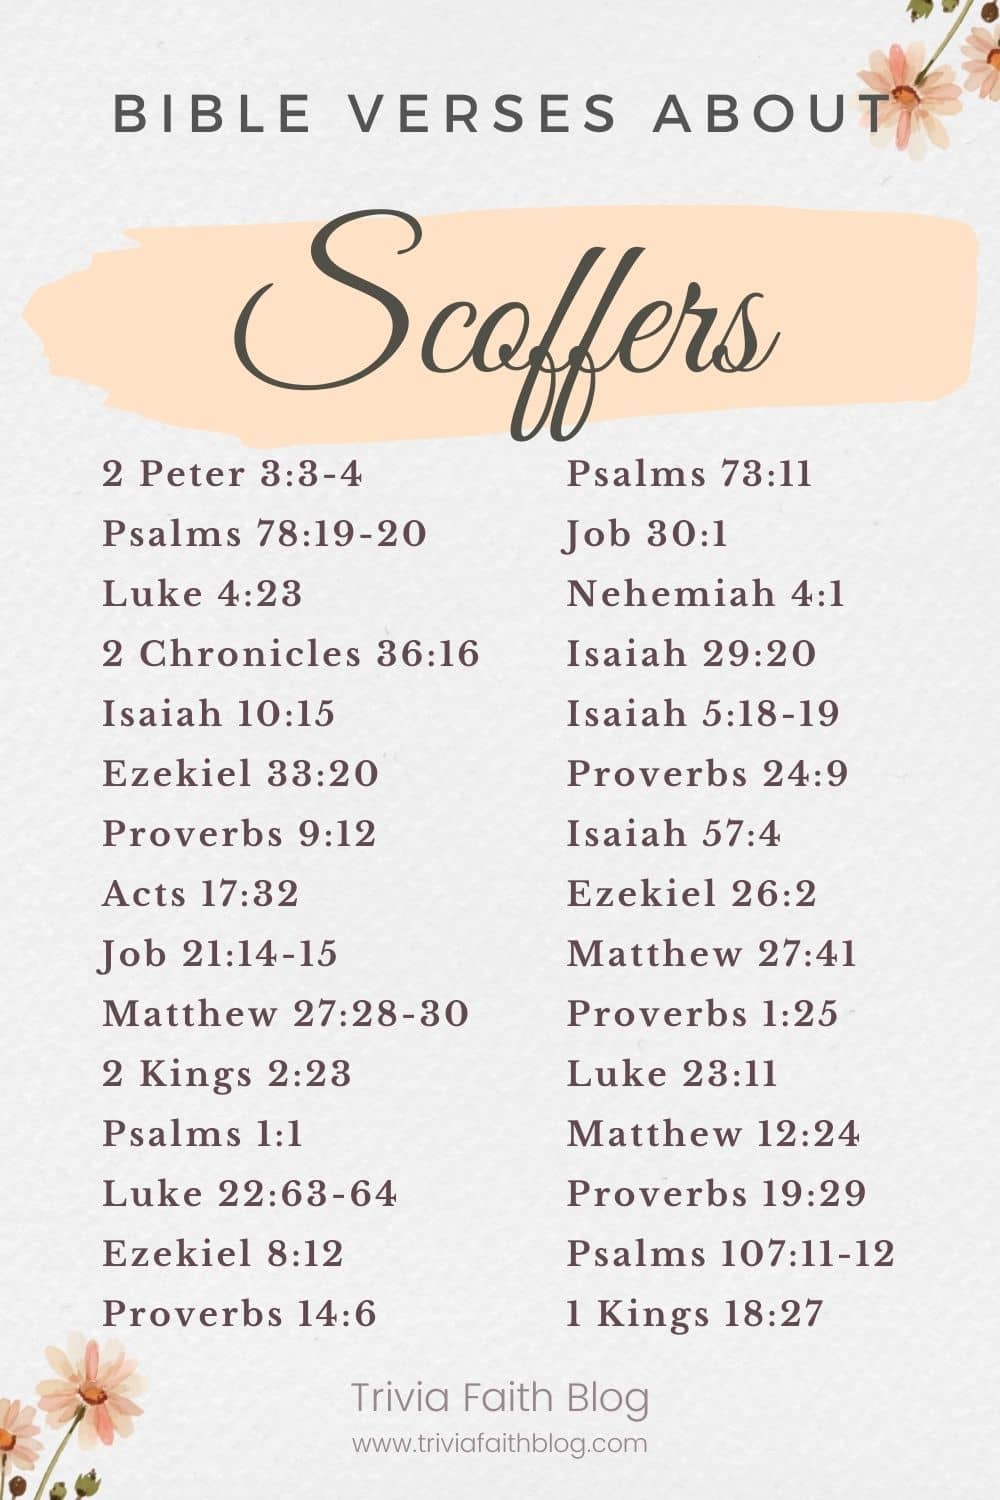 Bible verses about scoffers